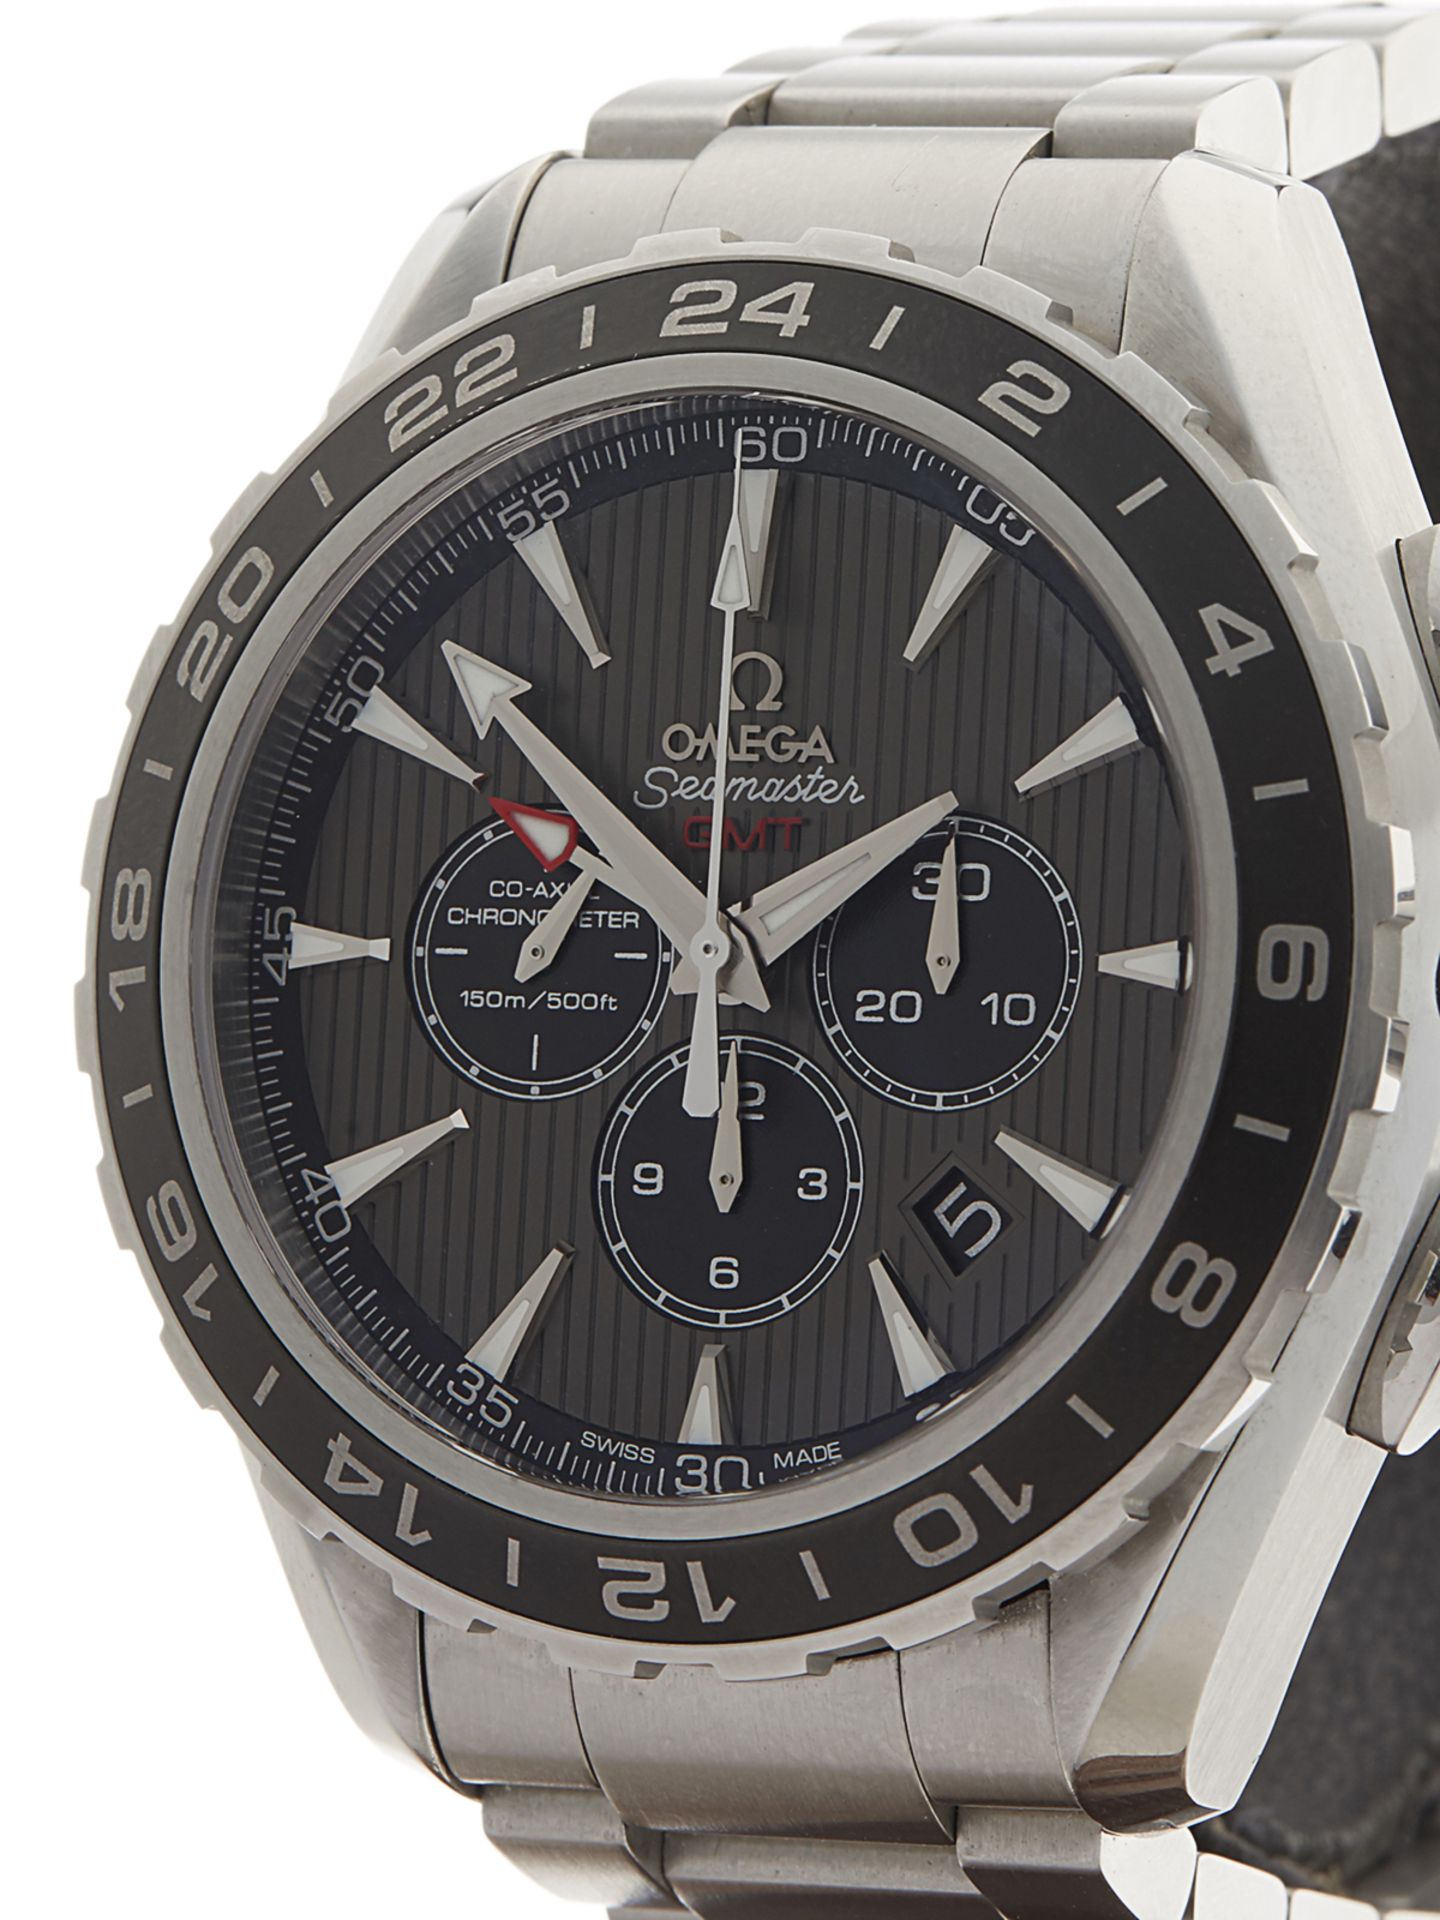 Omega Seamaster Aqua Terra GMT Chronograph 44mm Stainless Steel 231.13.44.52.06.001 - Image 3 of 9